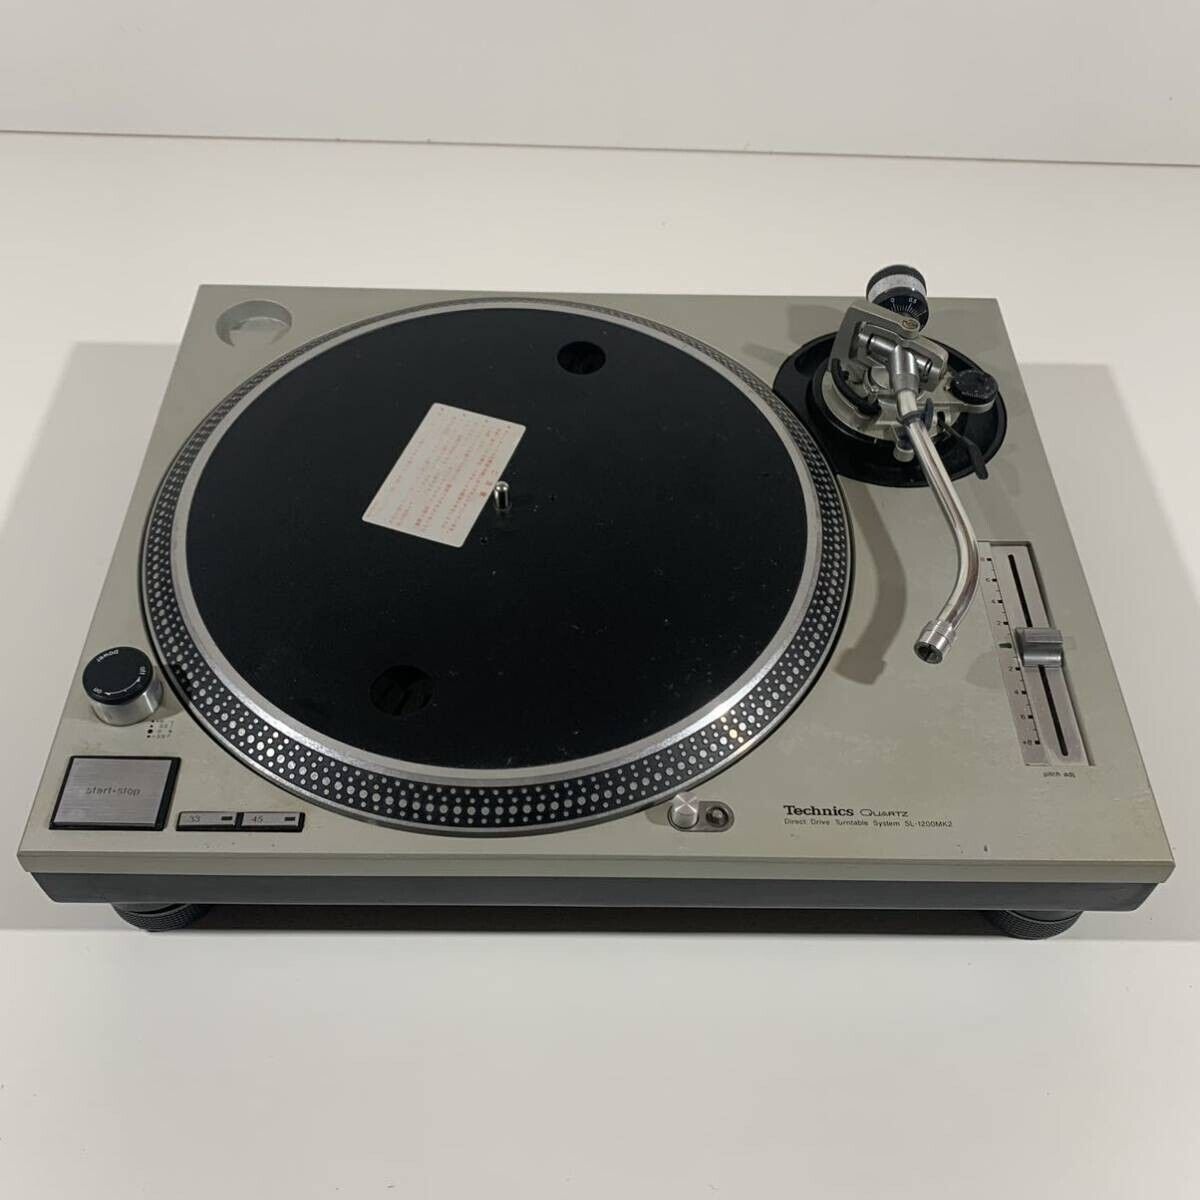 [Excellent] Technics SL-1200MK2 DJ Turntable Silver Tested Working Good